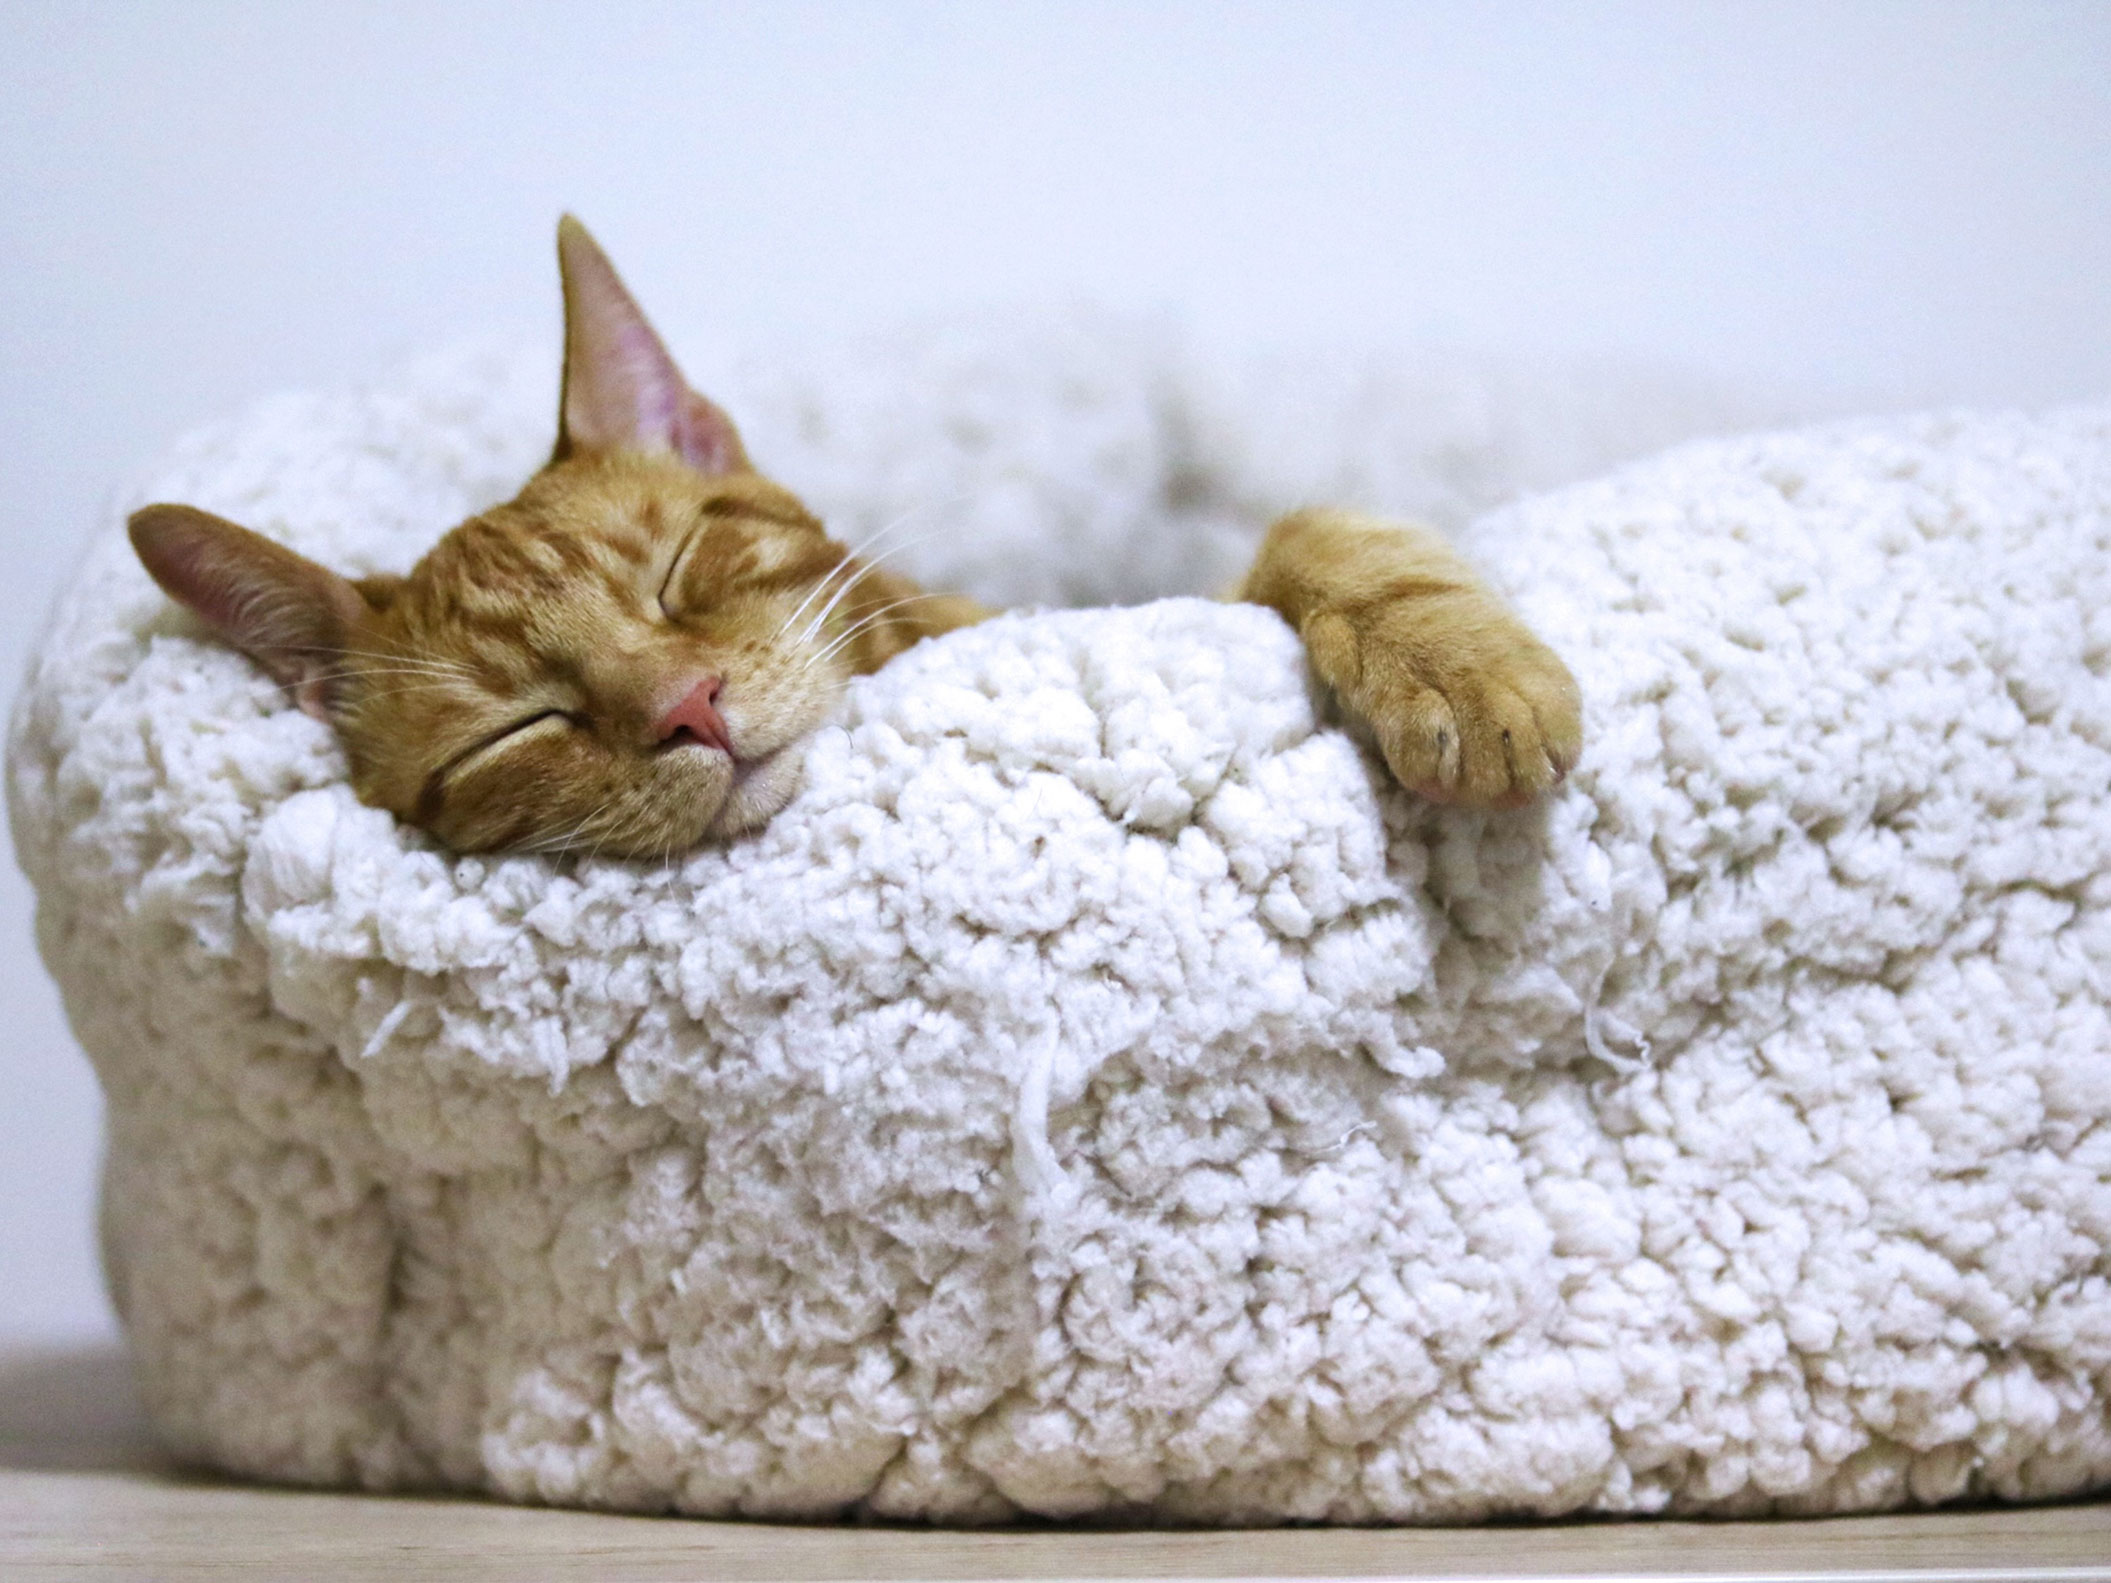 A ginger cat sleeping sweetly in his cozy soft bed